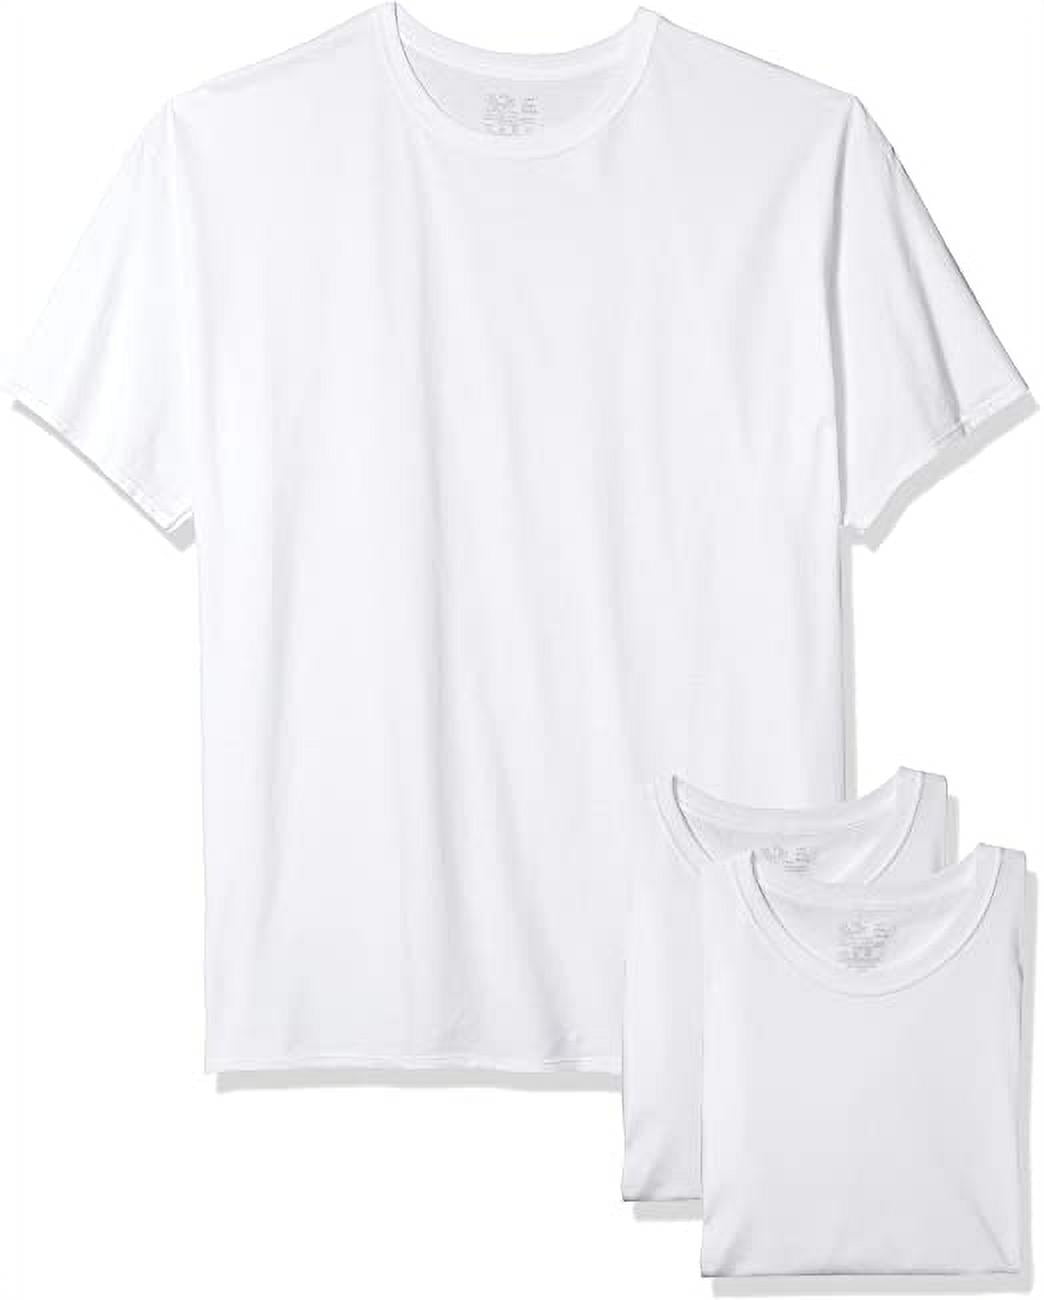 Fruit of the Loom 4 Pack of Men's Crew T-Shirt, White, X-Large ...